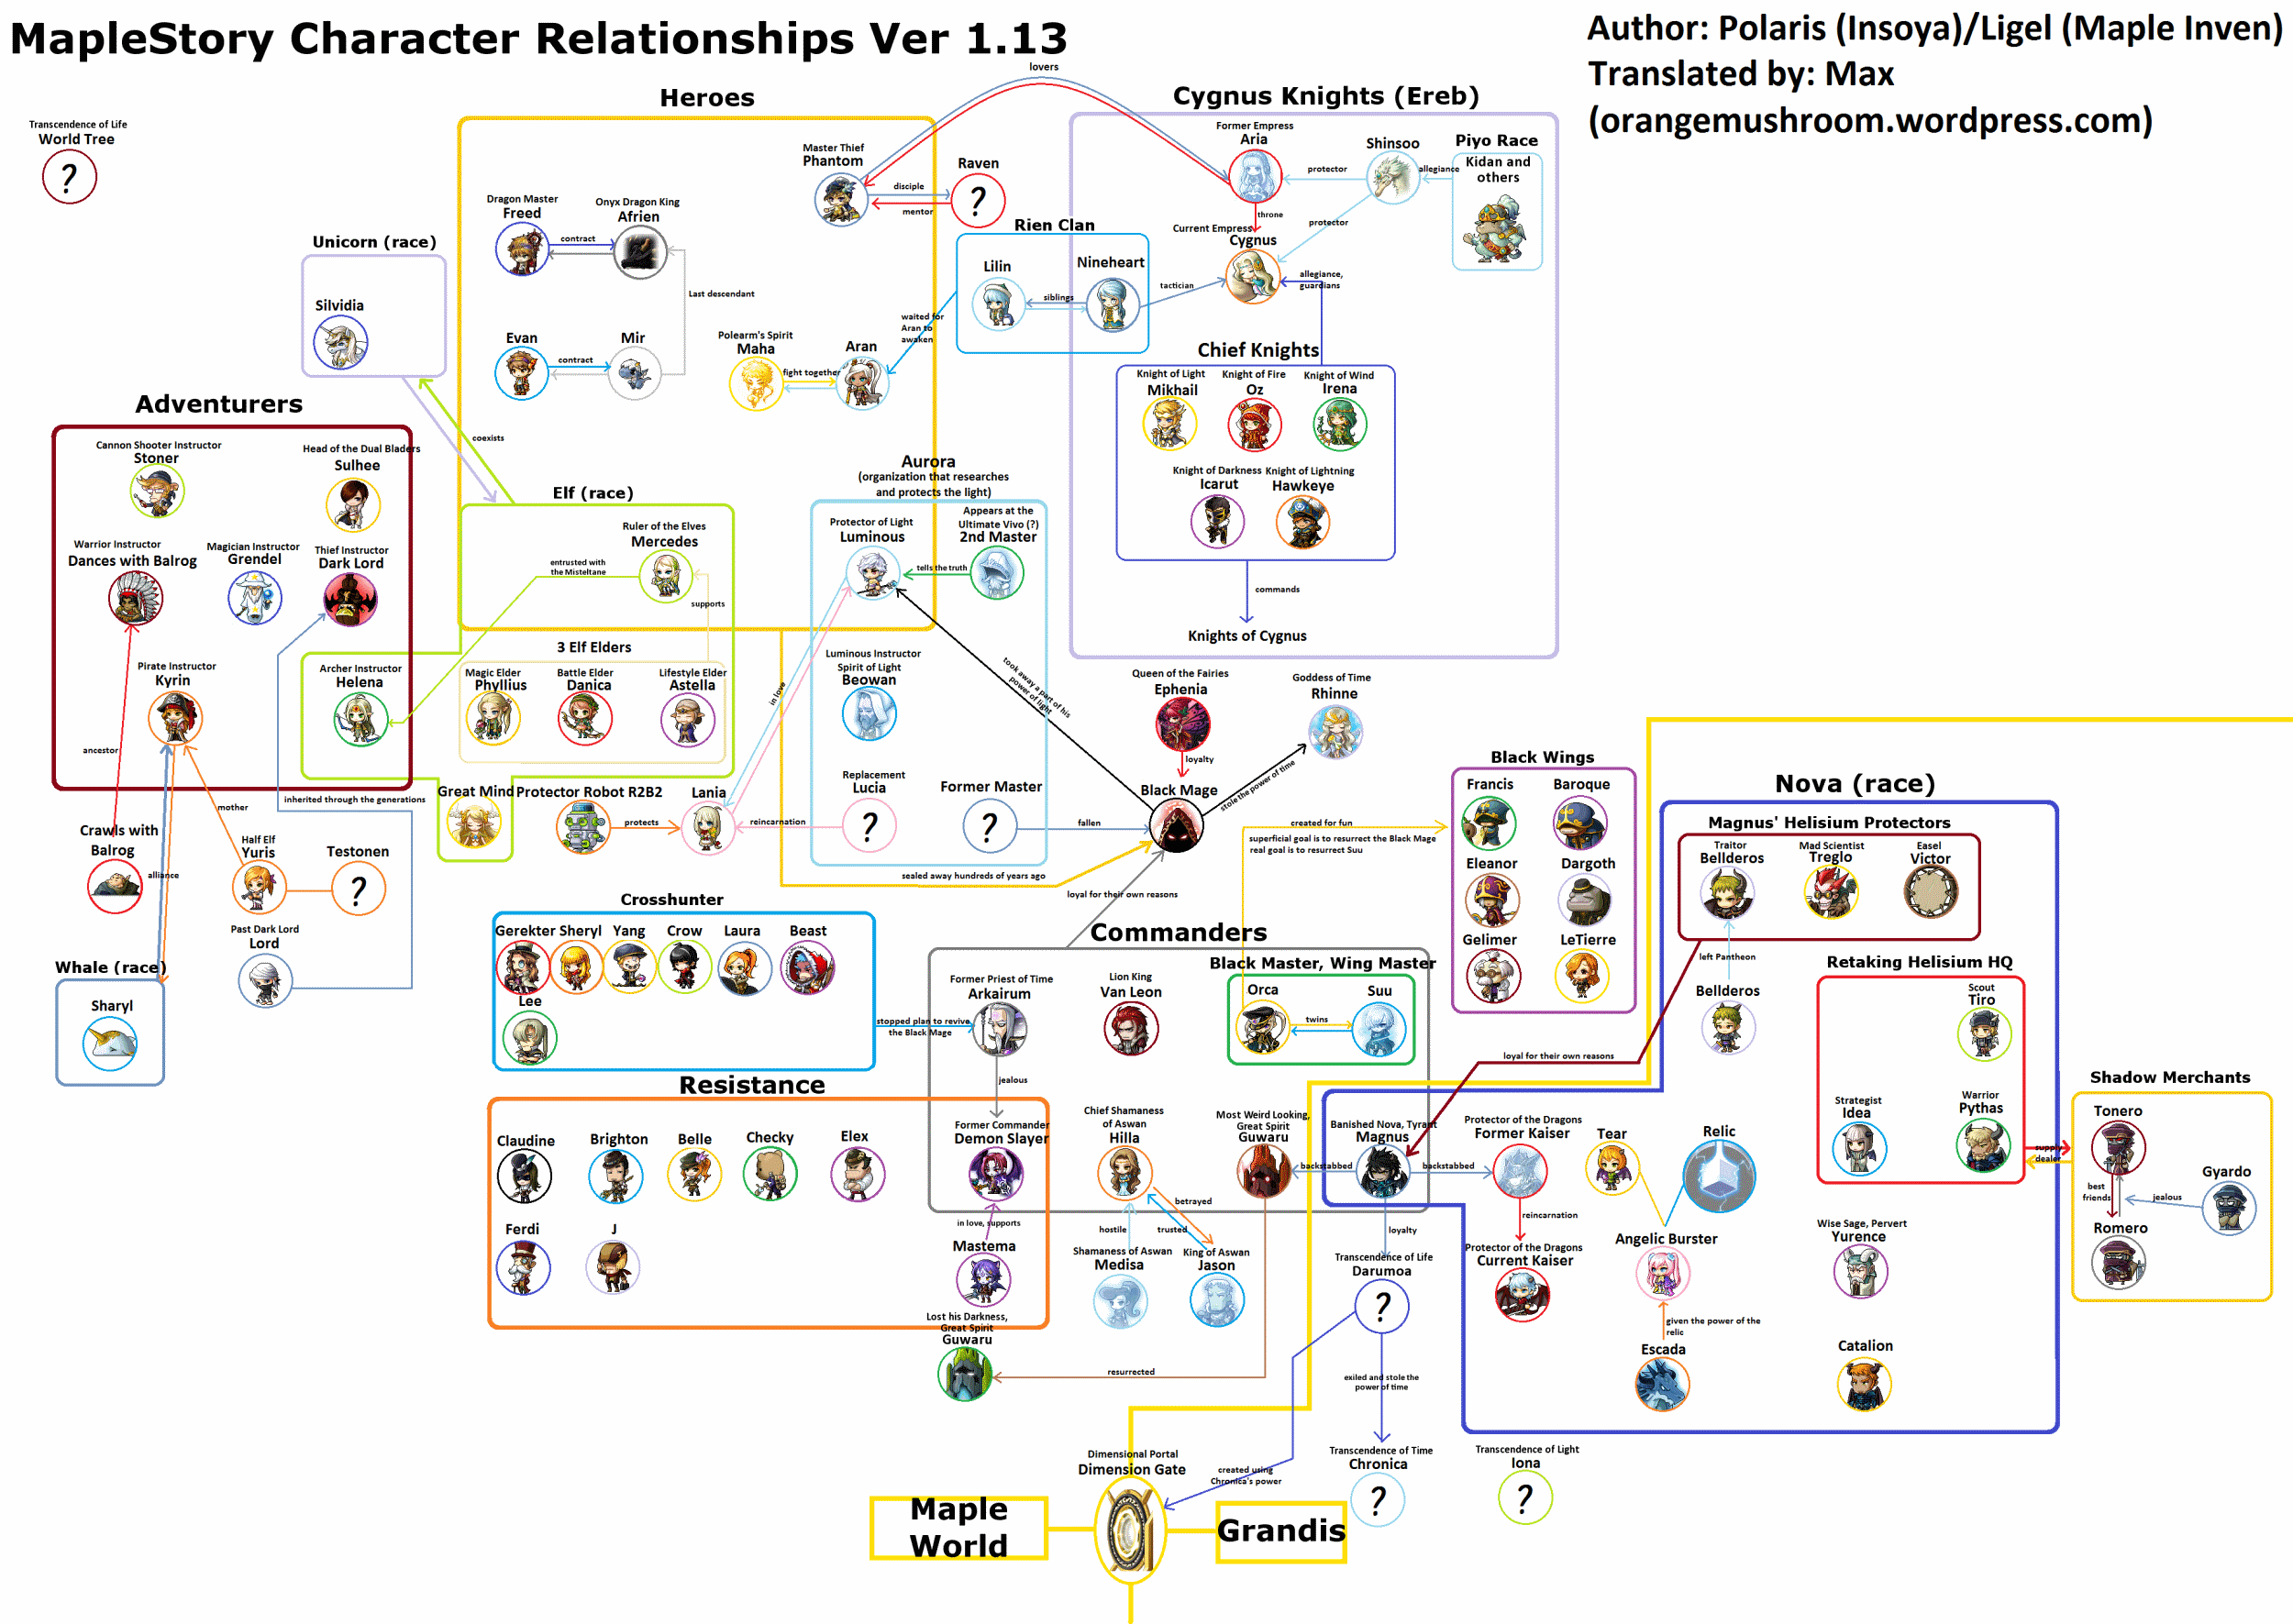 maplestory-character-relationships-ver-1-13.gif